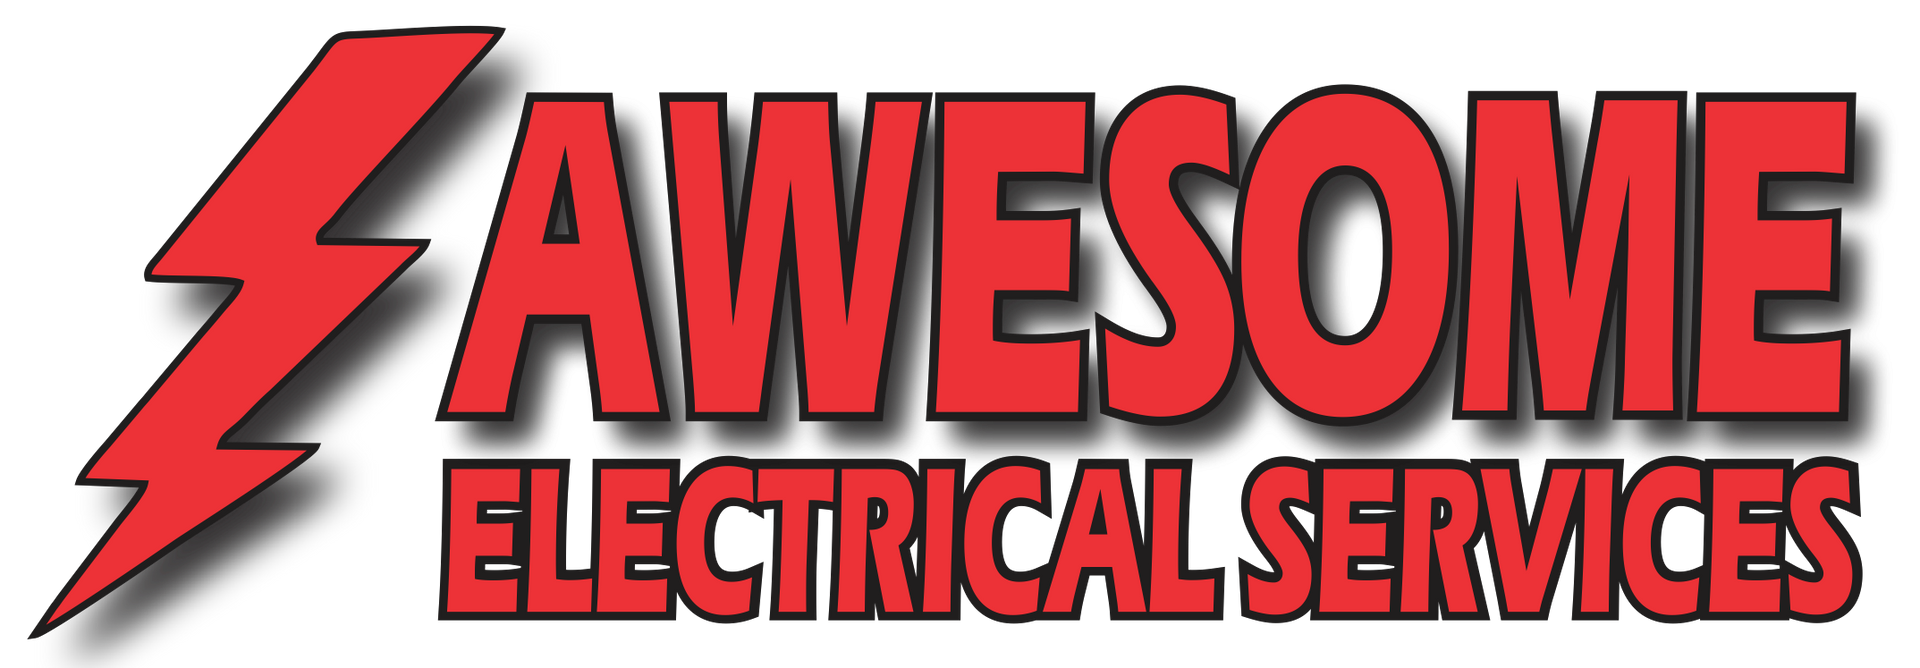 Awesome Electrical Services - Logo